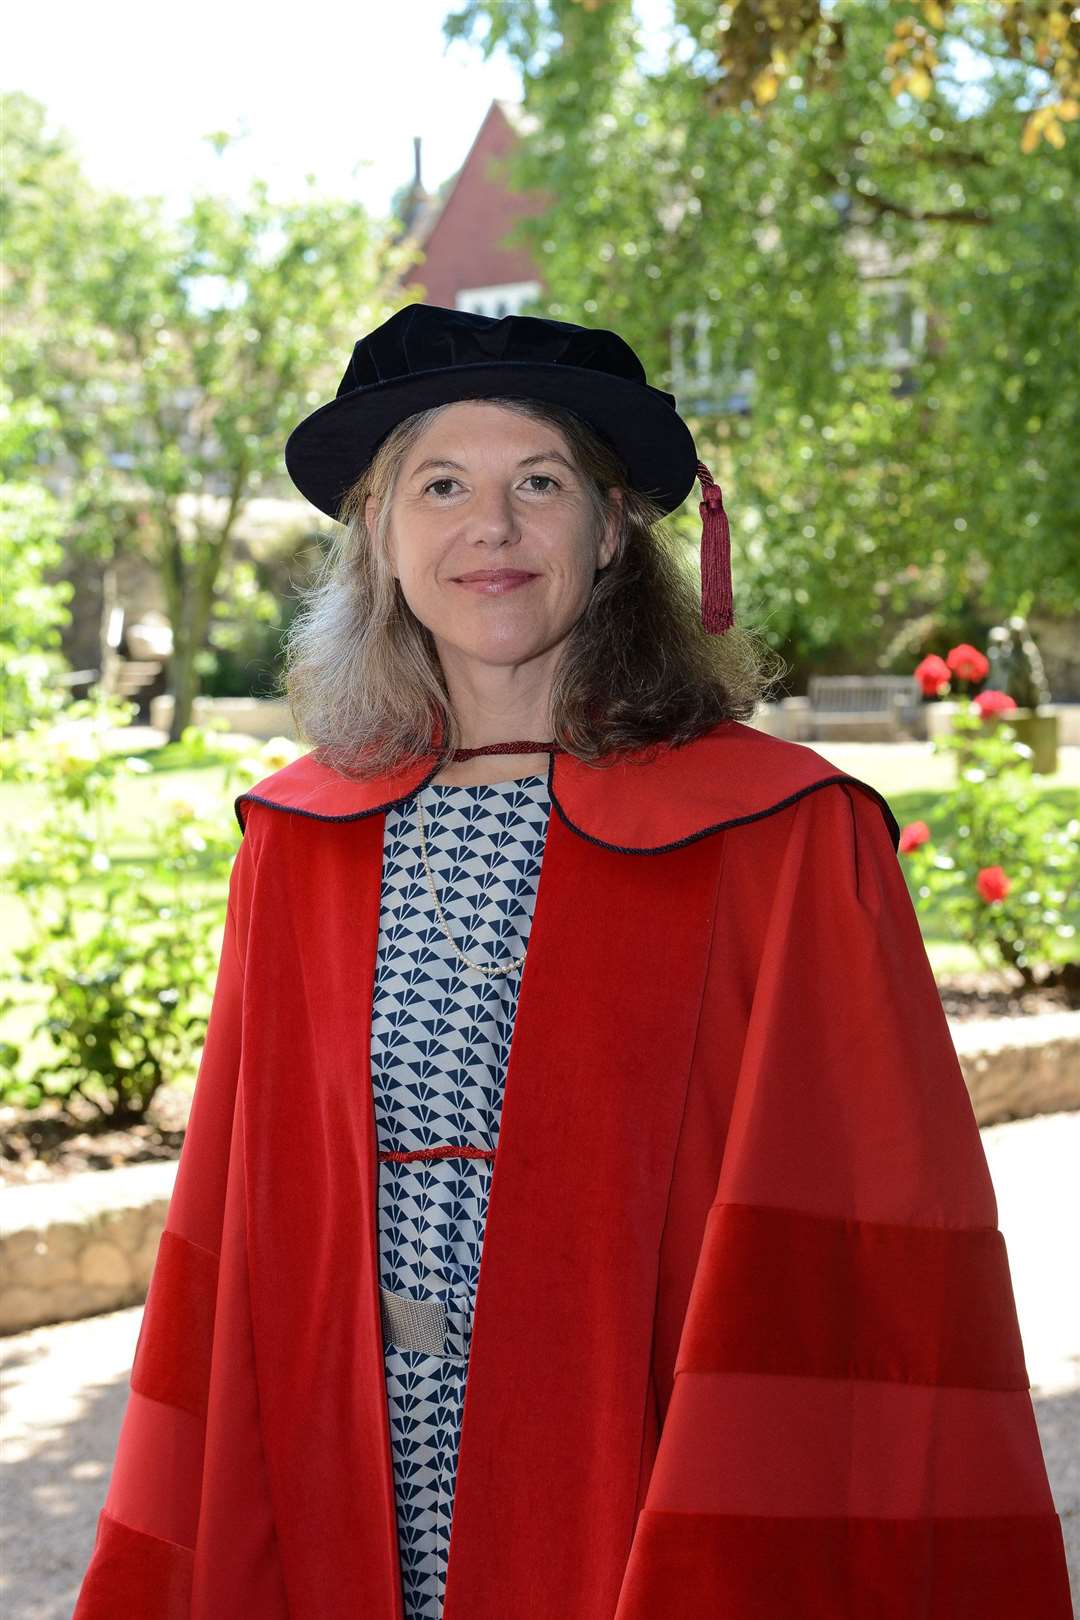 Dr Sigrid Rausing receiving an honorary doctorate from the University of Kent